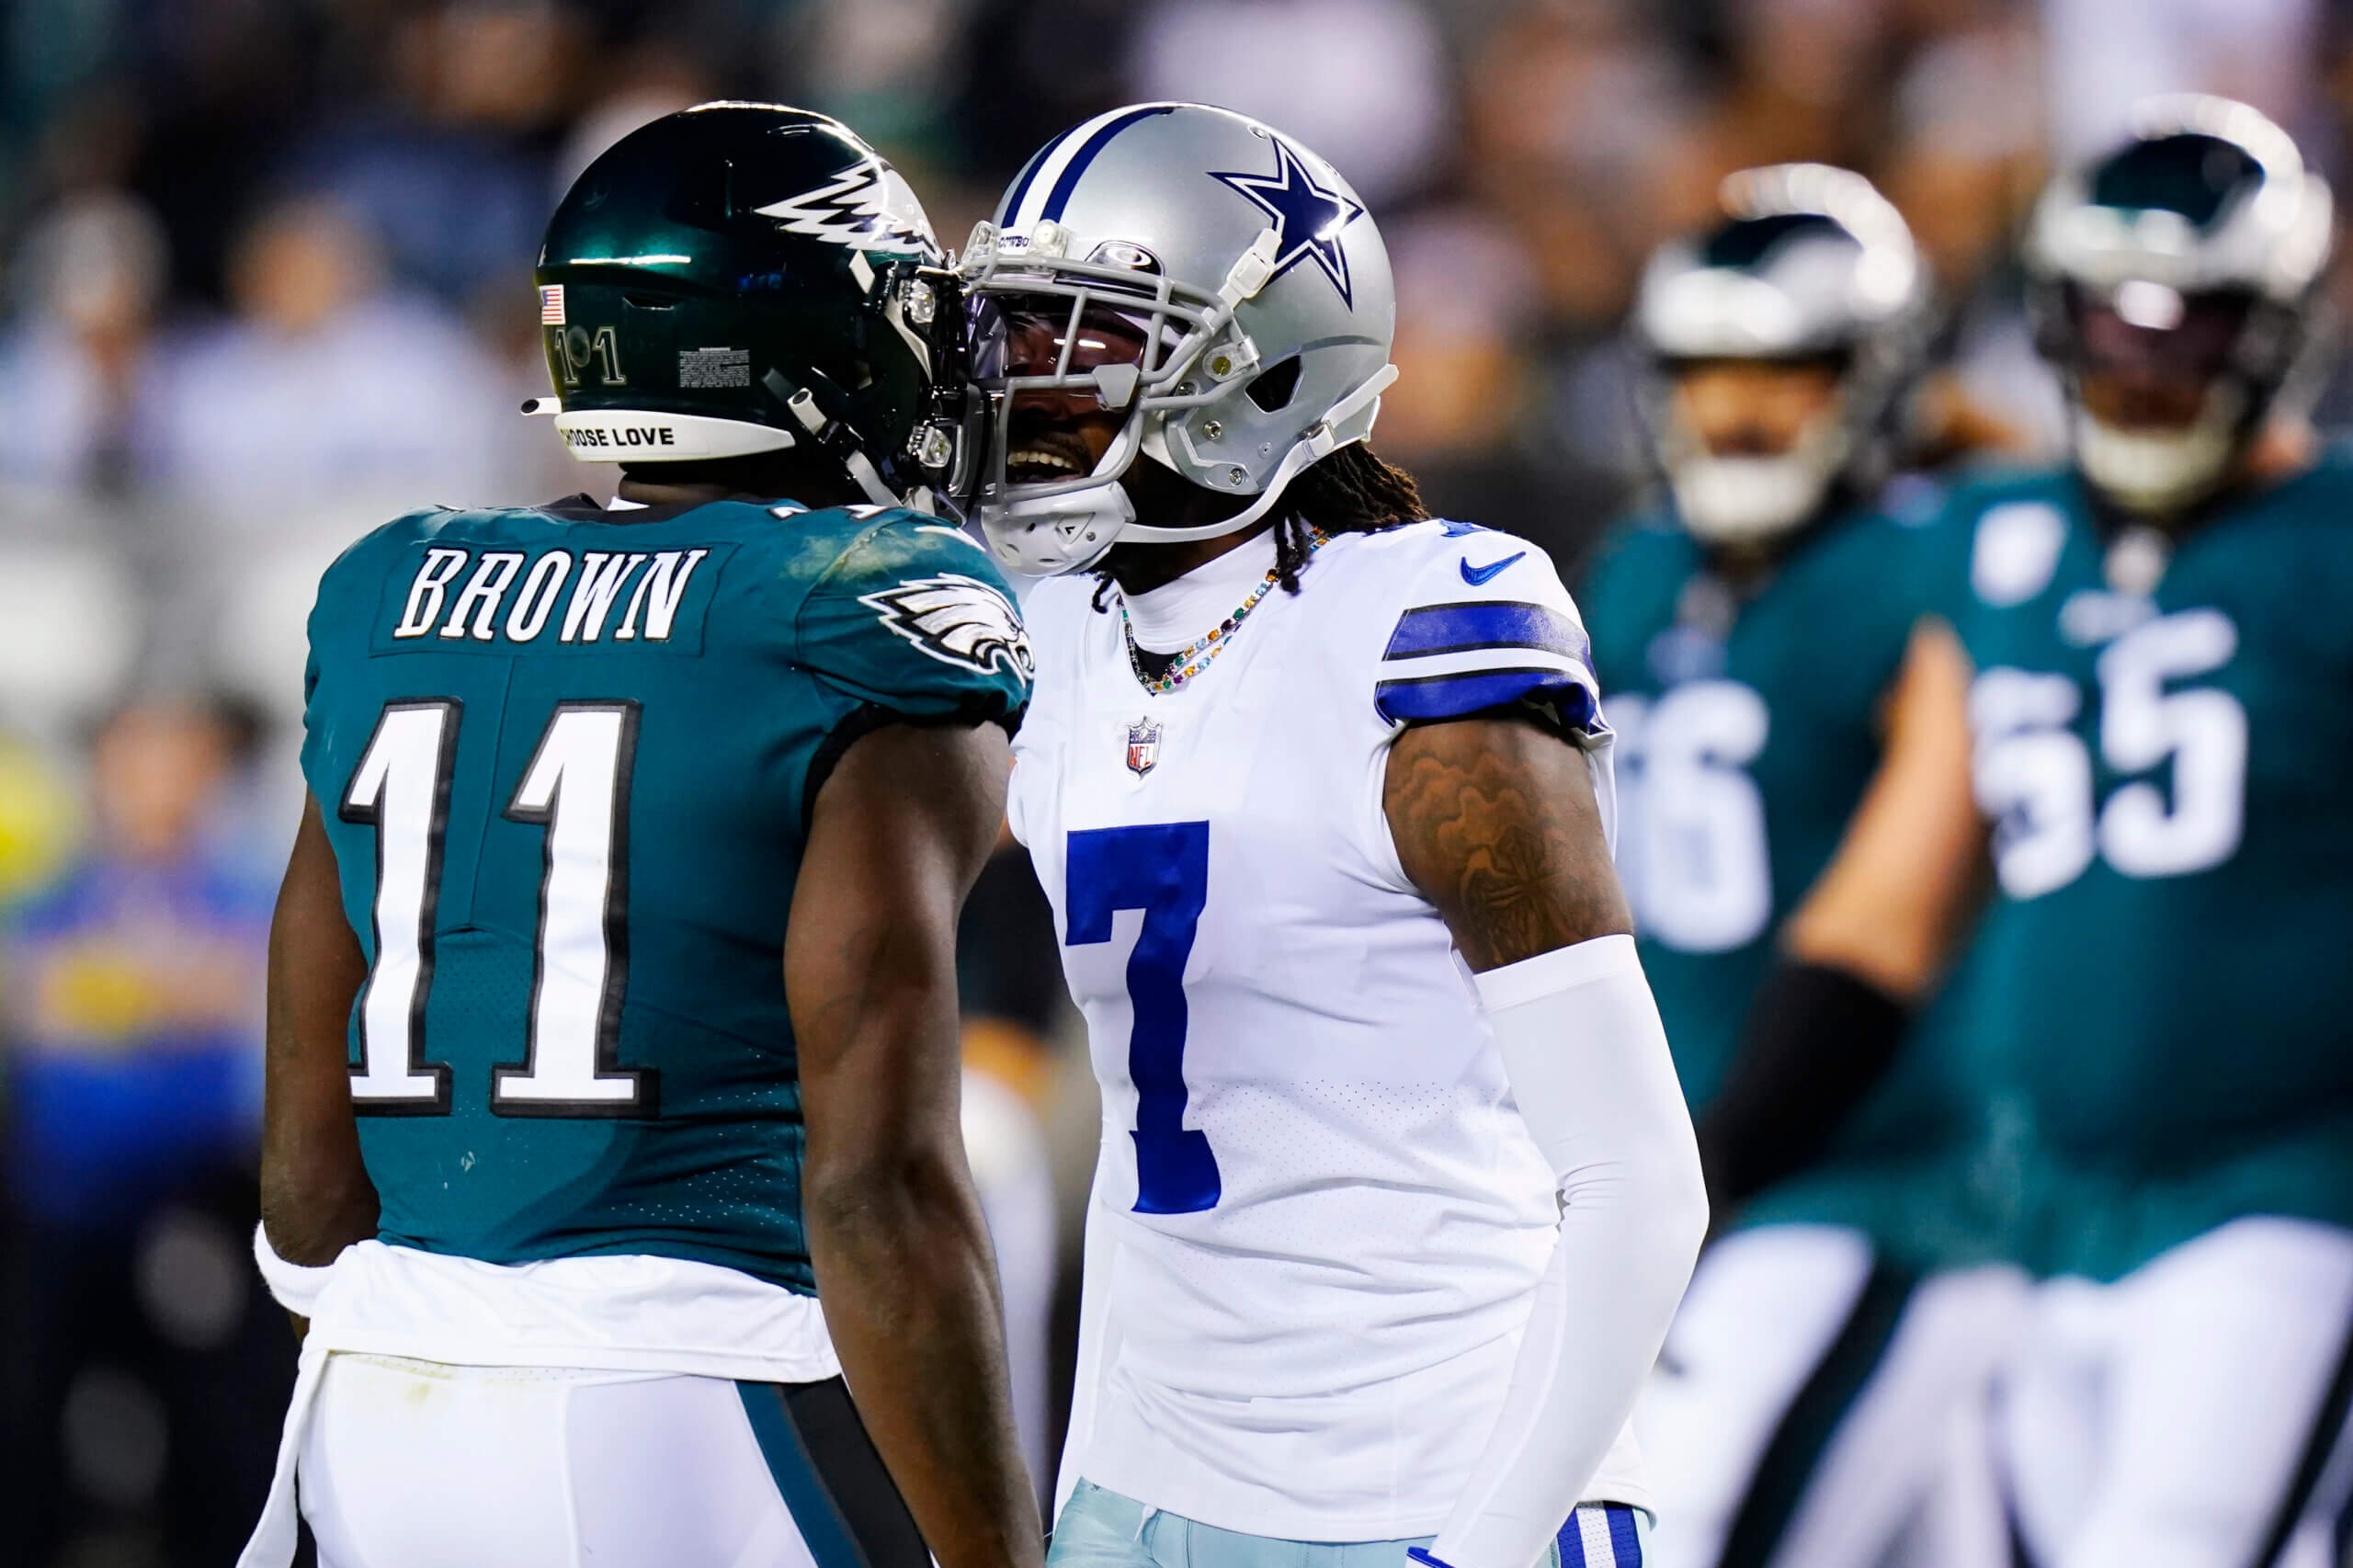 NFC East Division Winners: Does A.J. Brown Make the Eagles the Favorite?